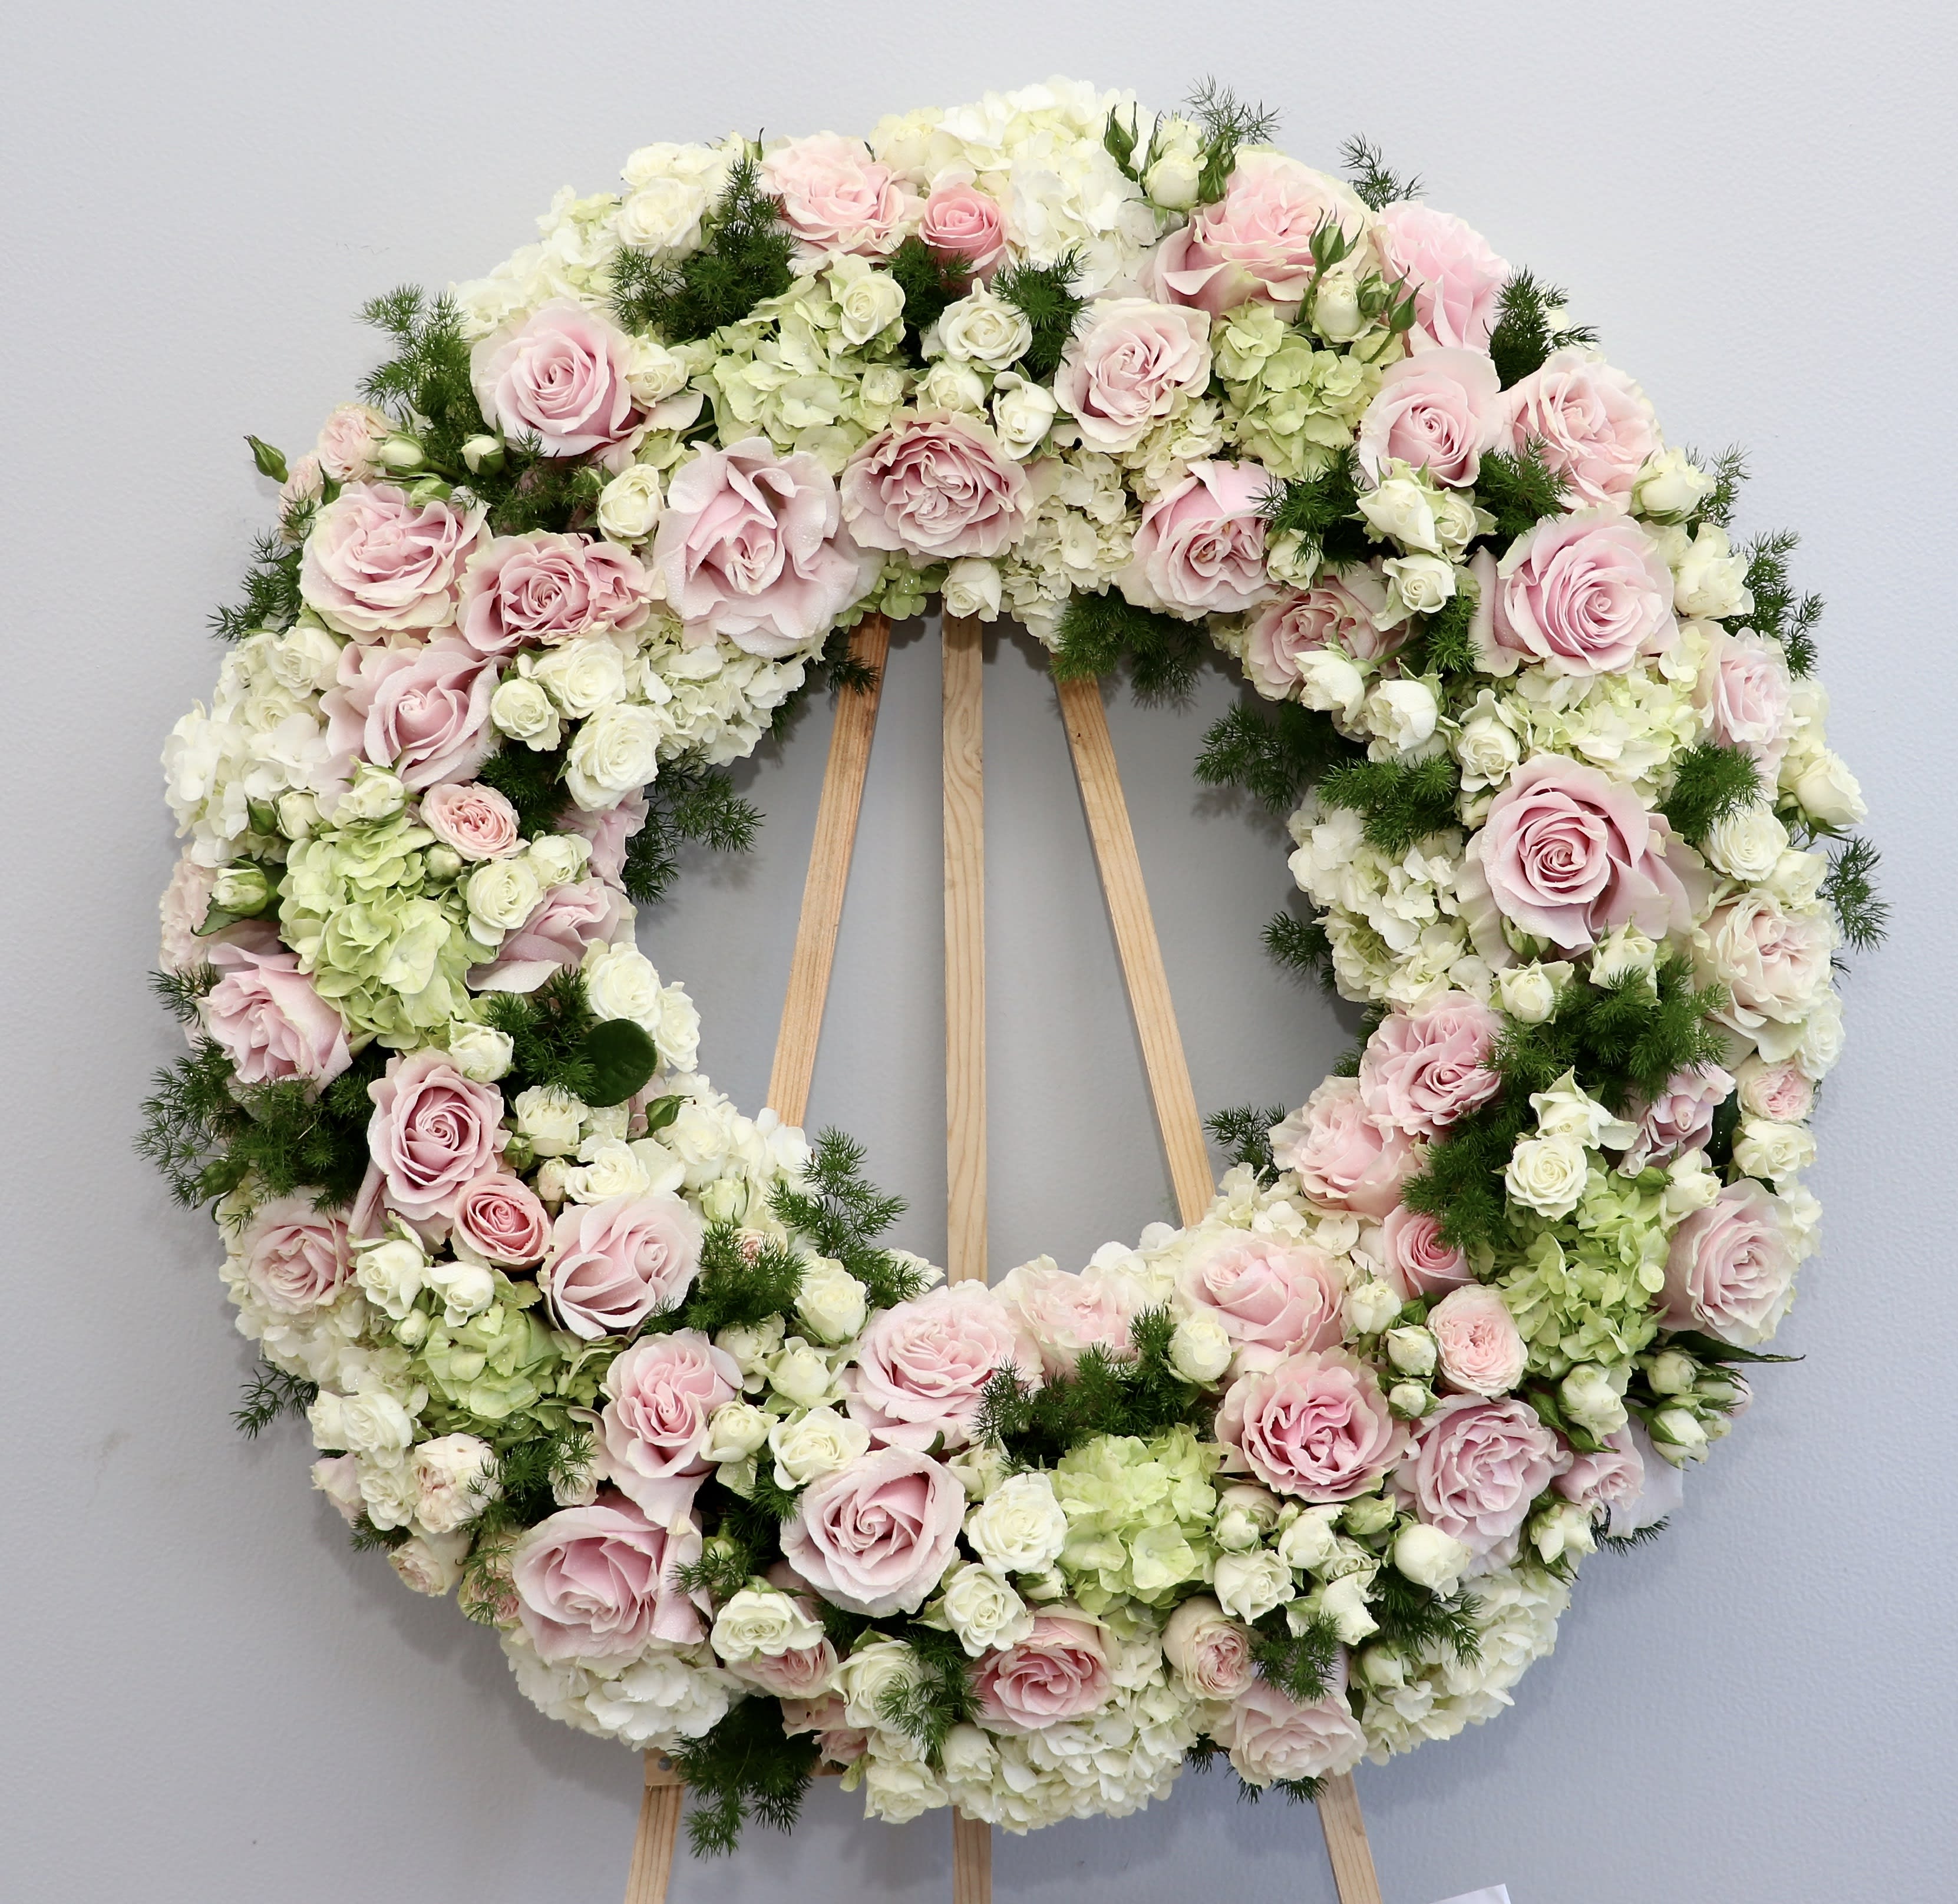 Blush Wreath Wonder  - Blush, white and green seasonal florals make up this gorgeous wreath.  We include easel, printed banner and delivery (some fees may apply).  Standard size is 30'', deluxe is 36'', and premium is 42''.